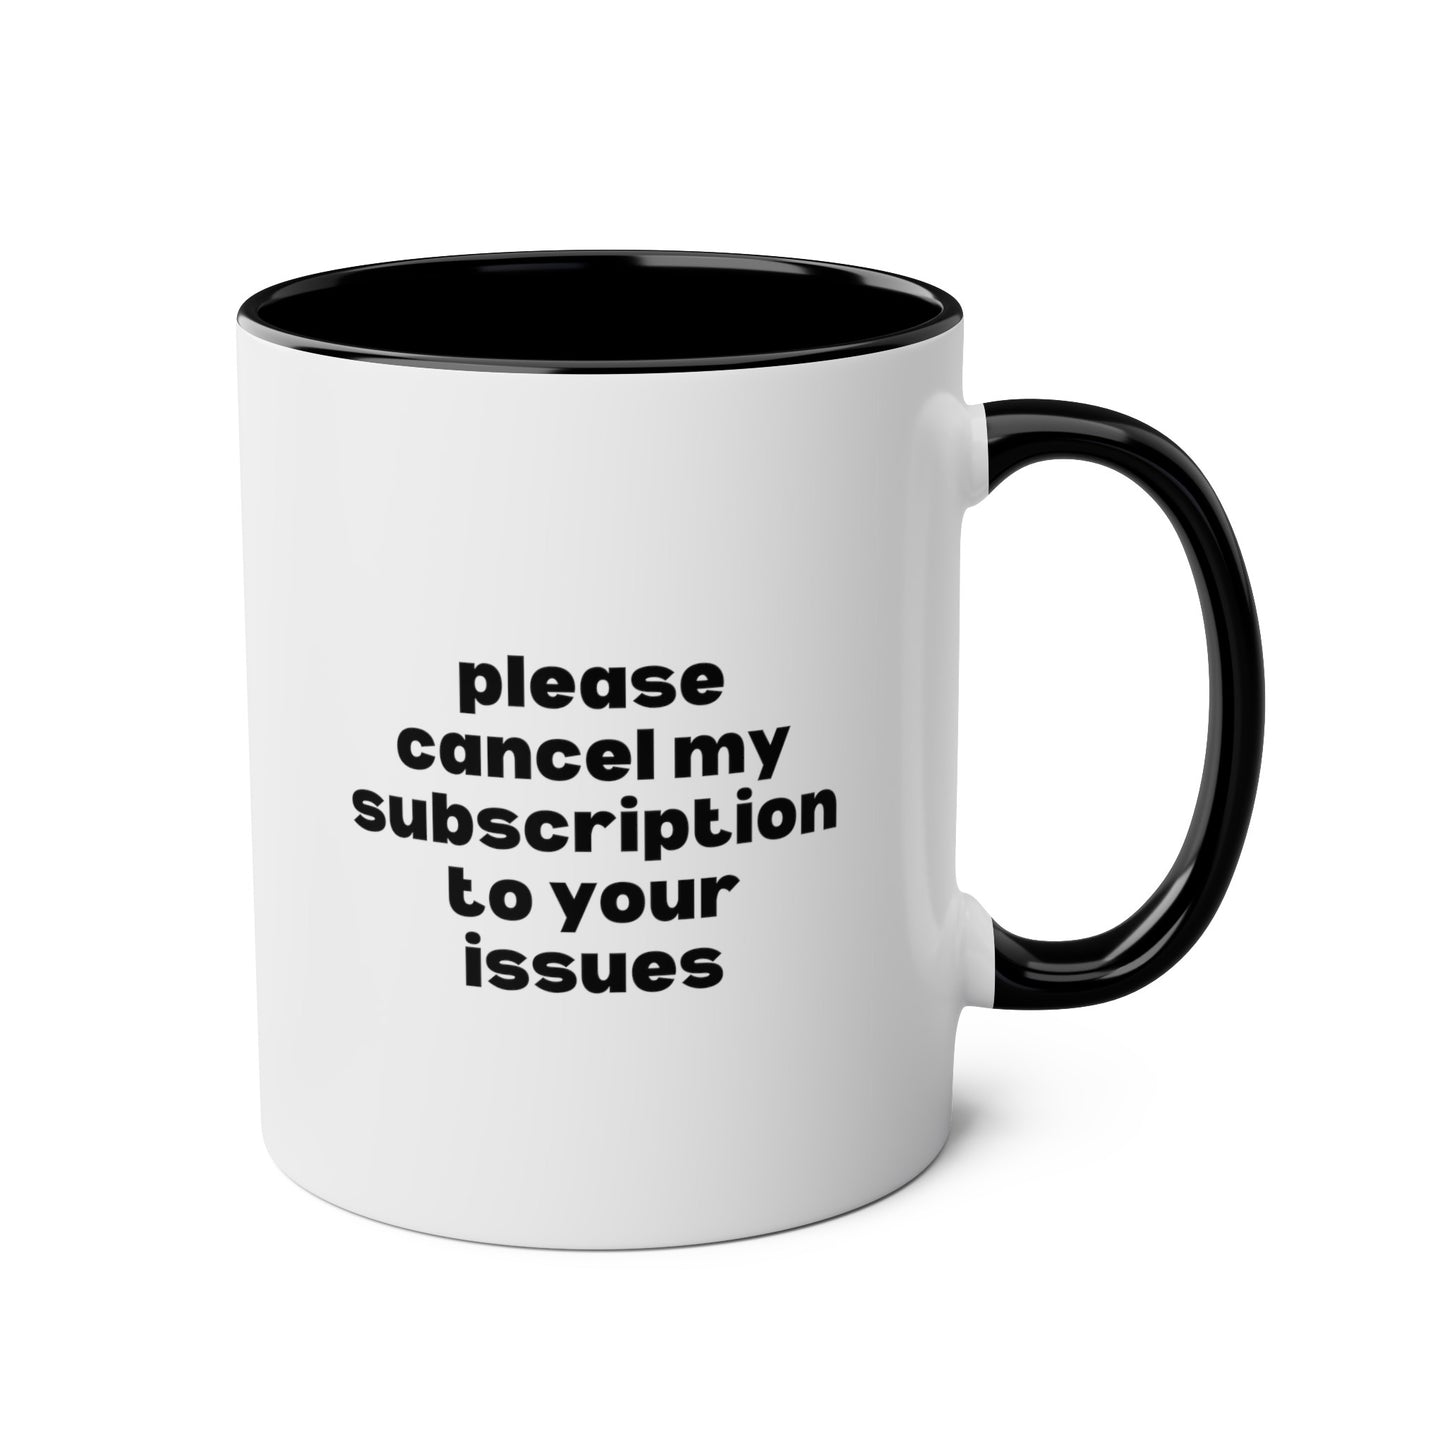 Please Cancel My Subscription to Your Issues 11oz white with black accent funny large coffee mug gift for her wife friend gf sarcastic attitude quote girlfriend waveywares wavey wares wavywares wavy wares